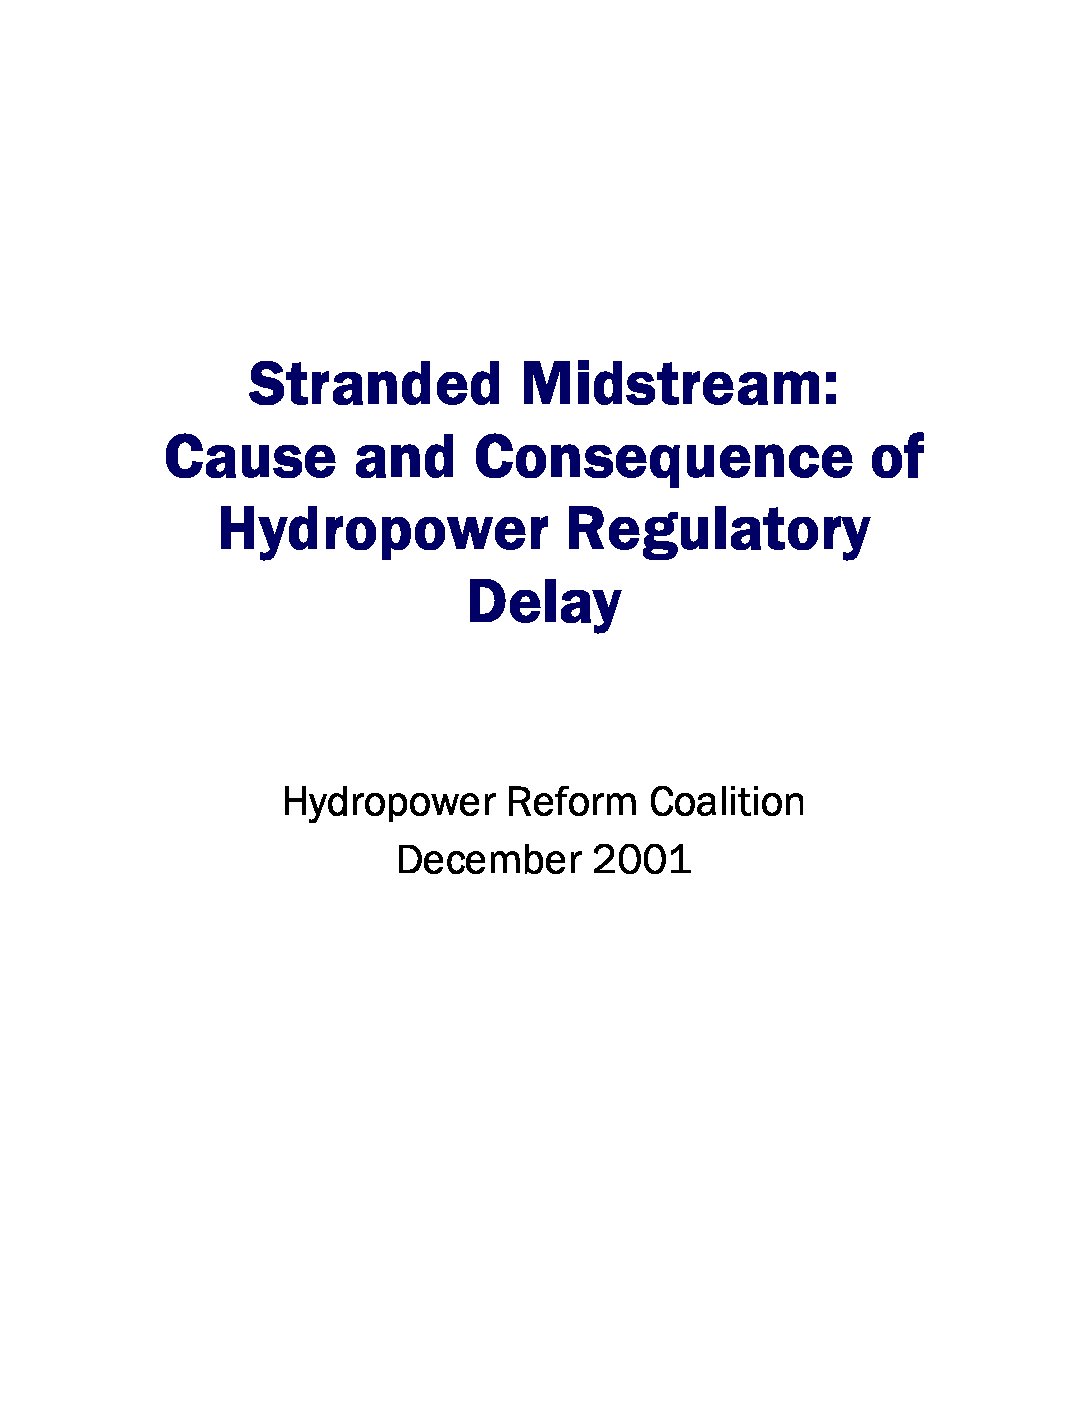 Stranded Midstream: Cause and Consequence of Hydropower Regulatory Delay